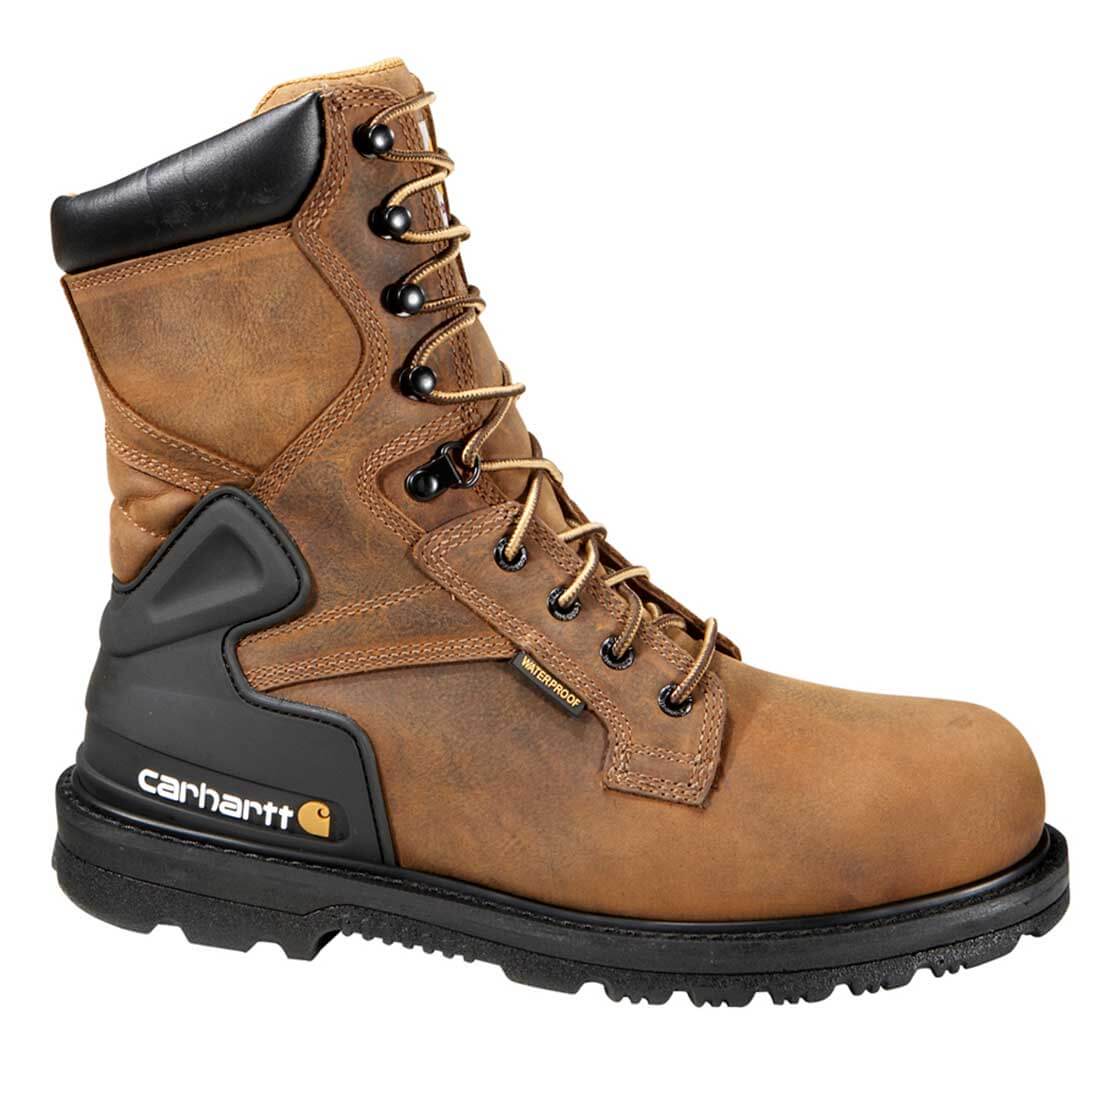 Carhartt - CMW8200 - Core Men's Bison Brown Leather Waterproof Steel Safety Toe 8 Lace-up Work Boot